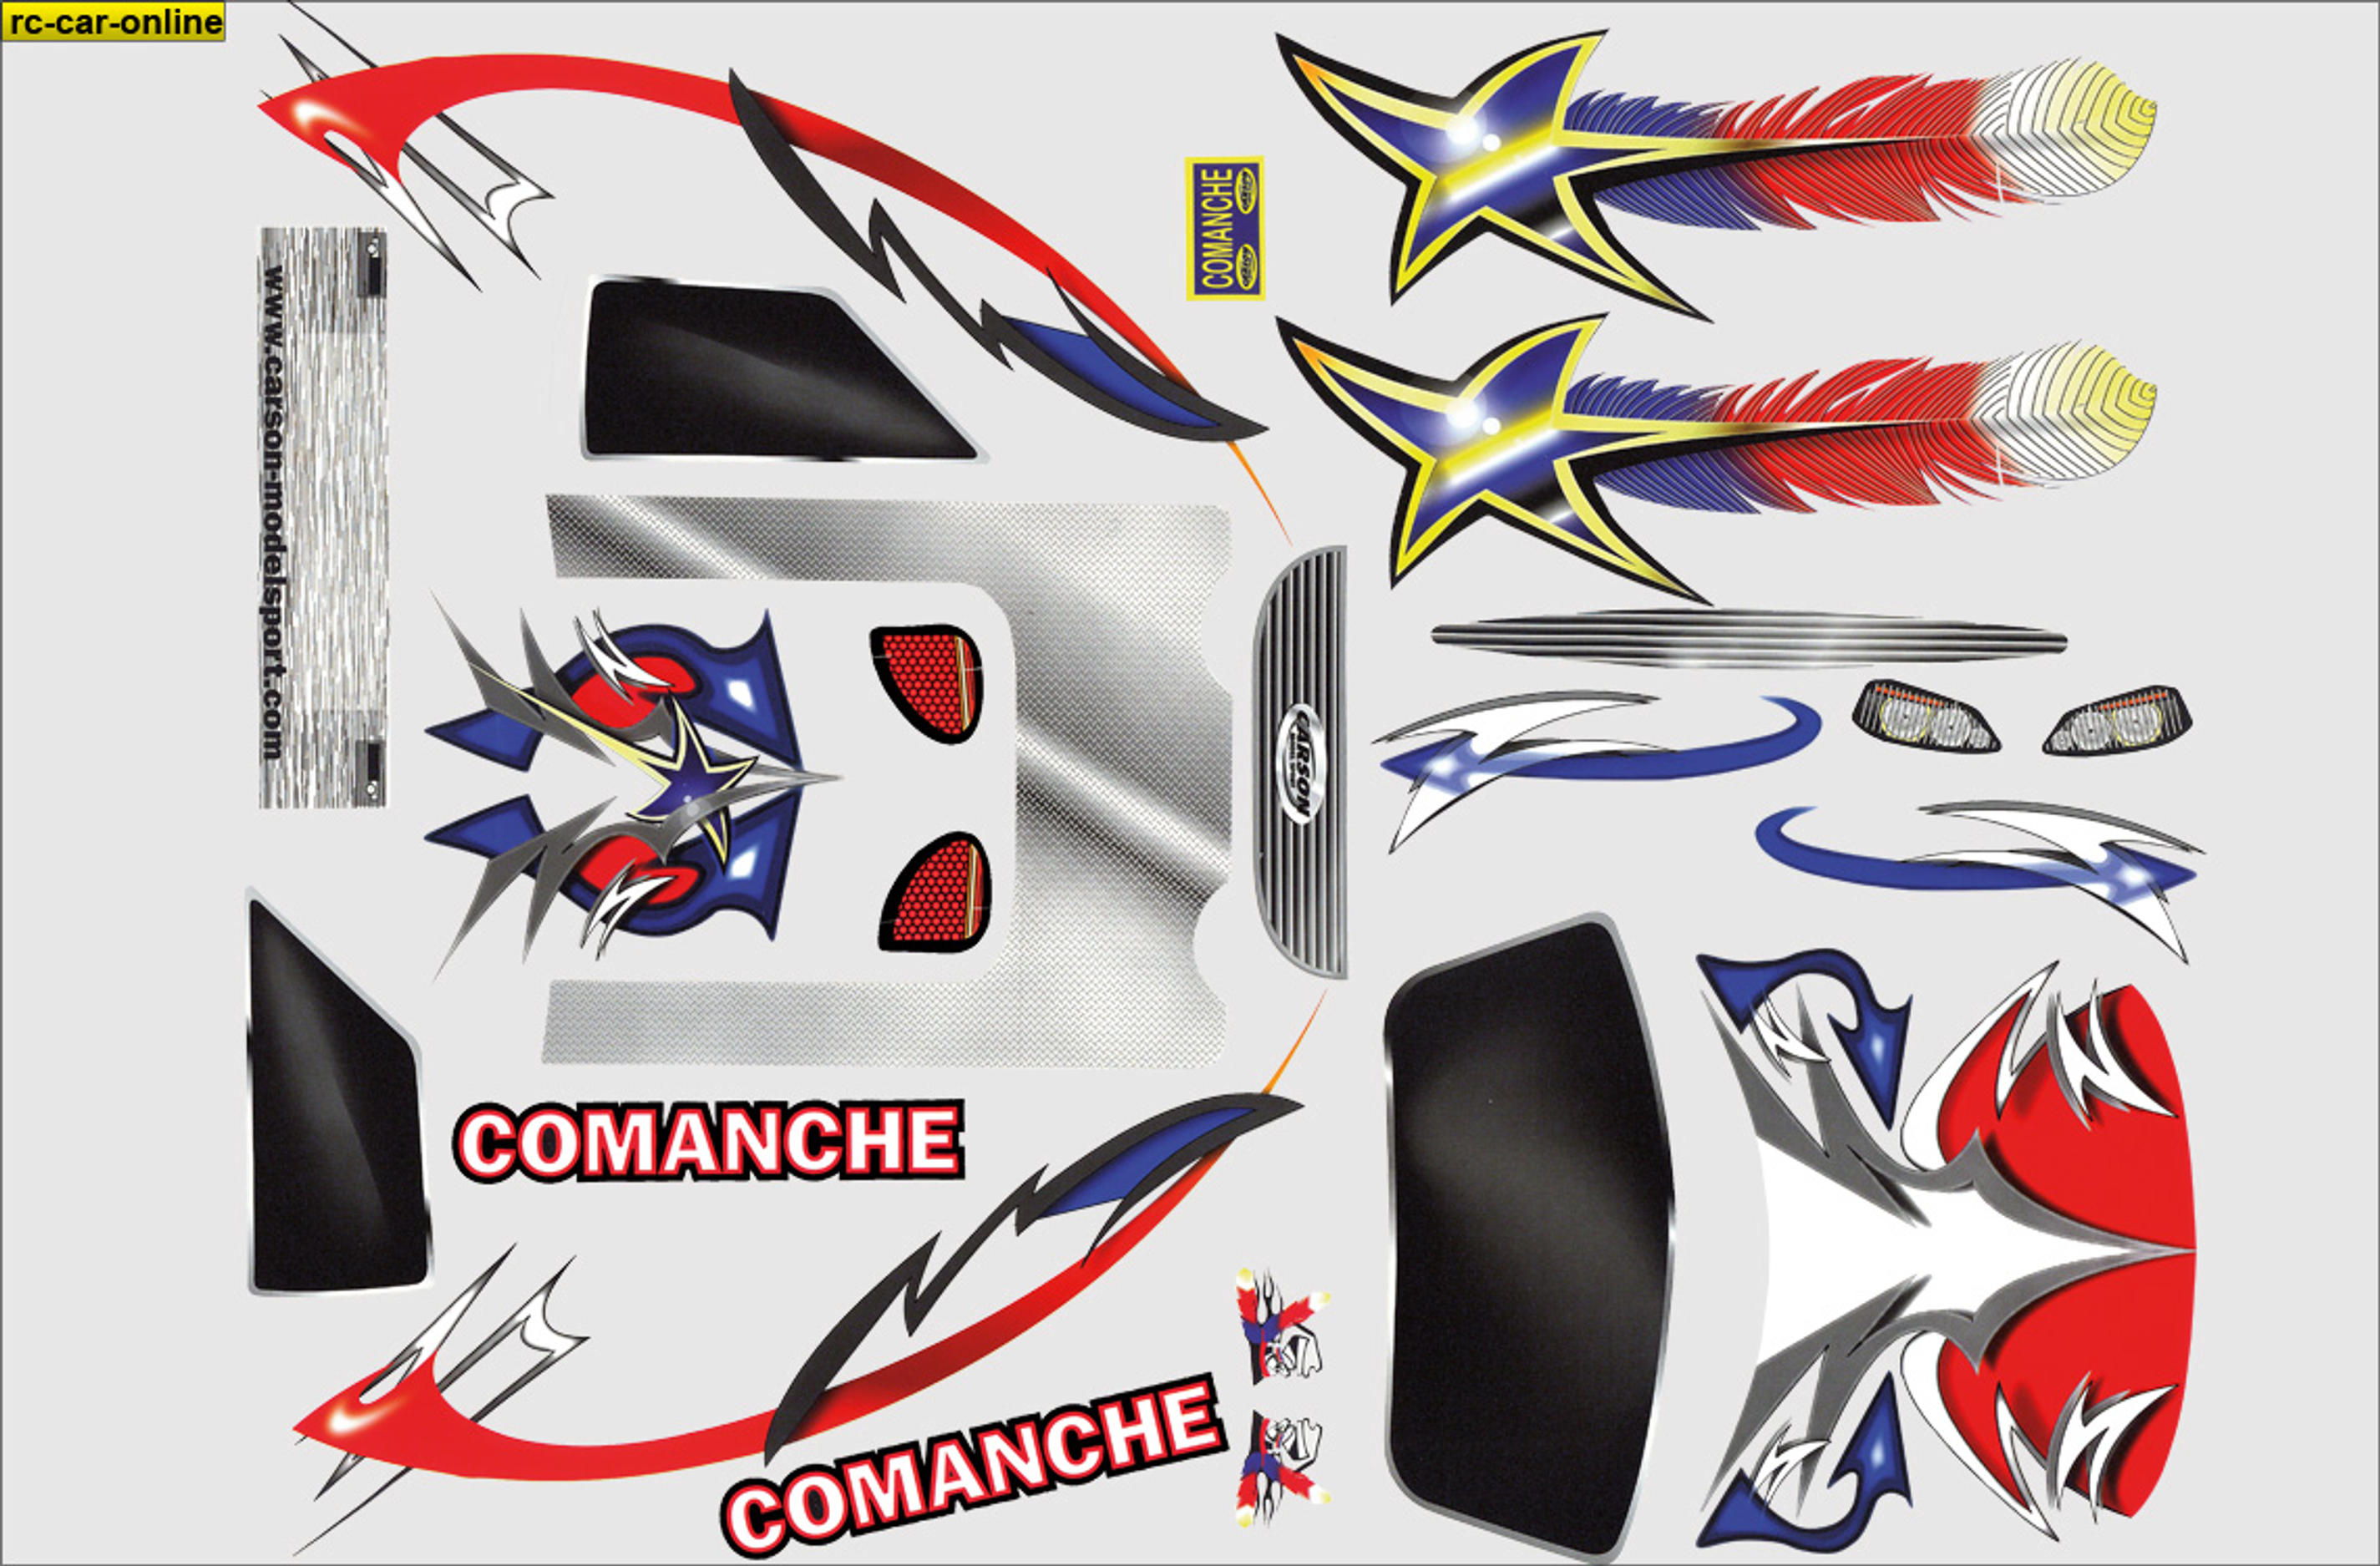 305032 Vehicle decal set for Comanche